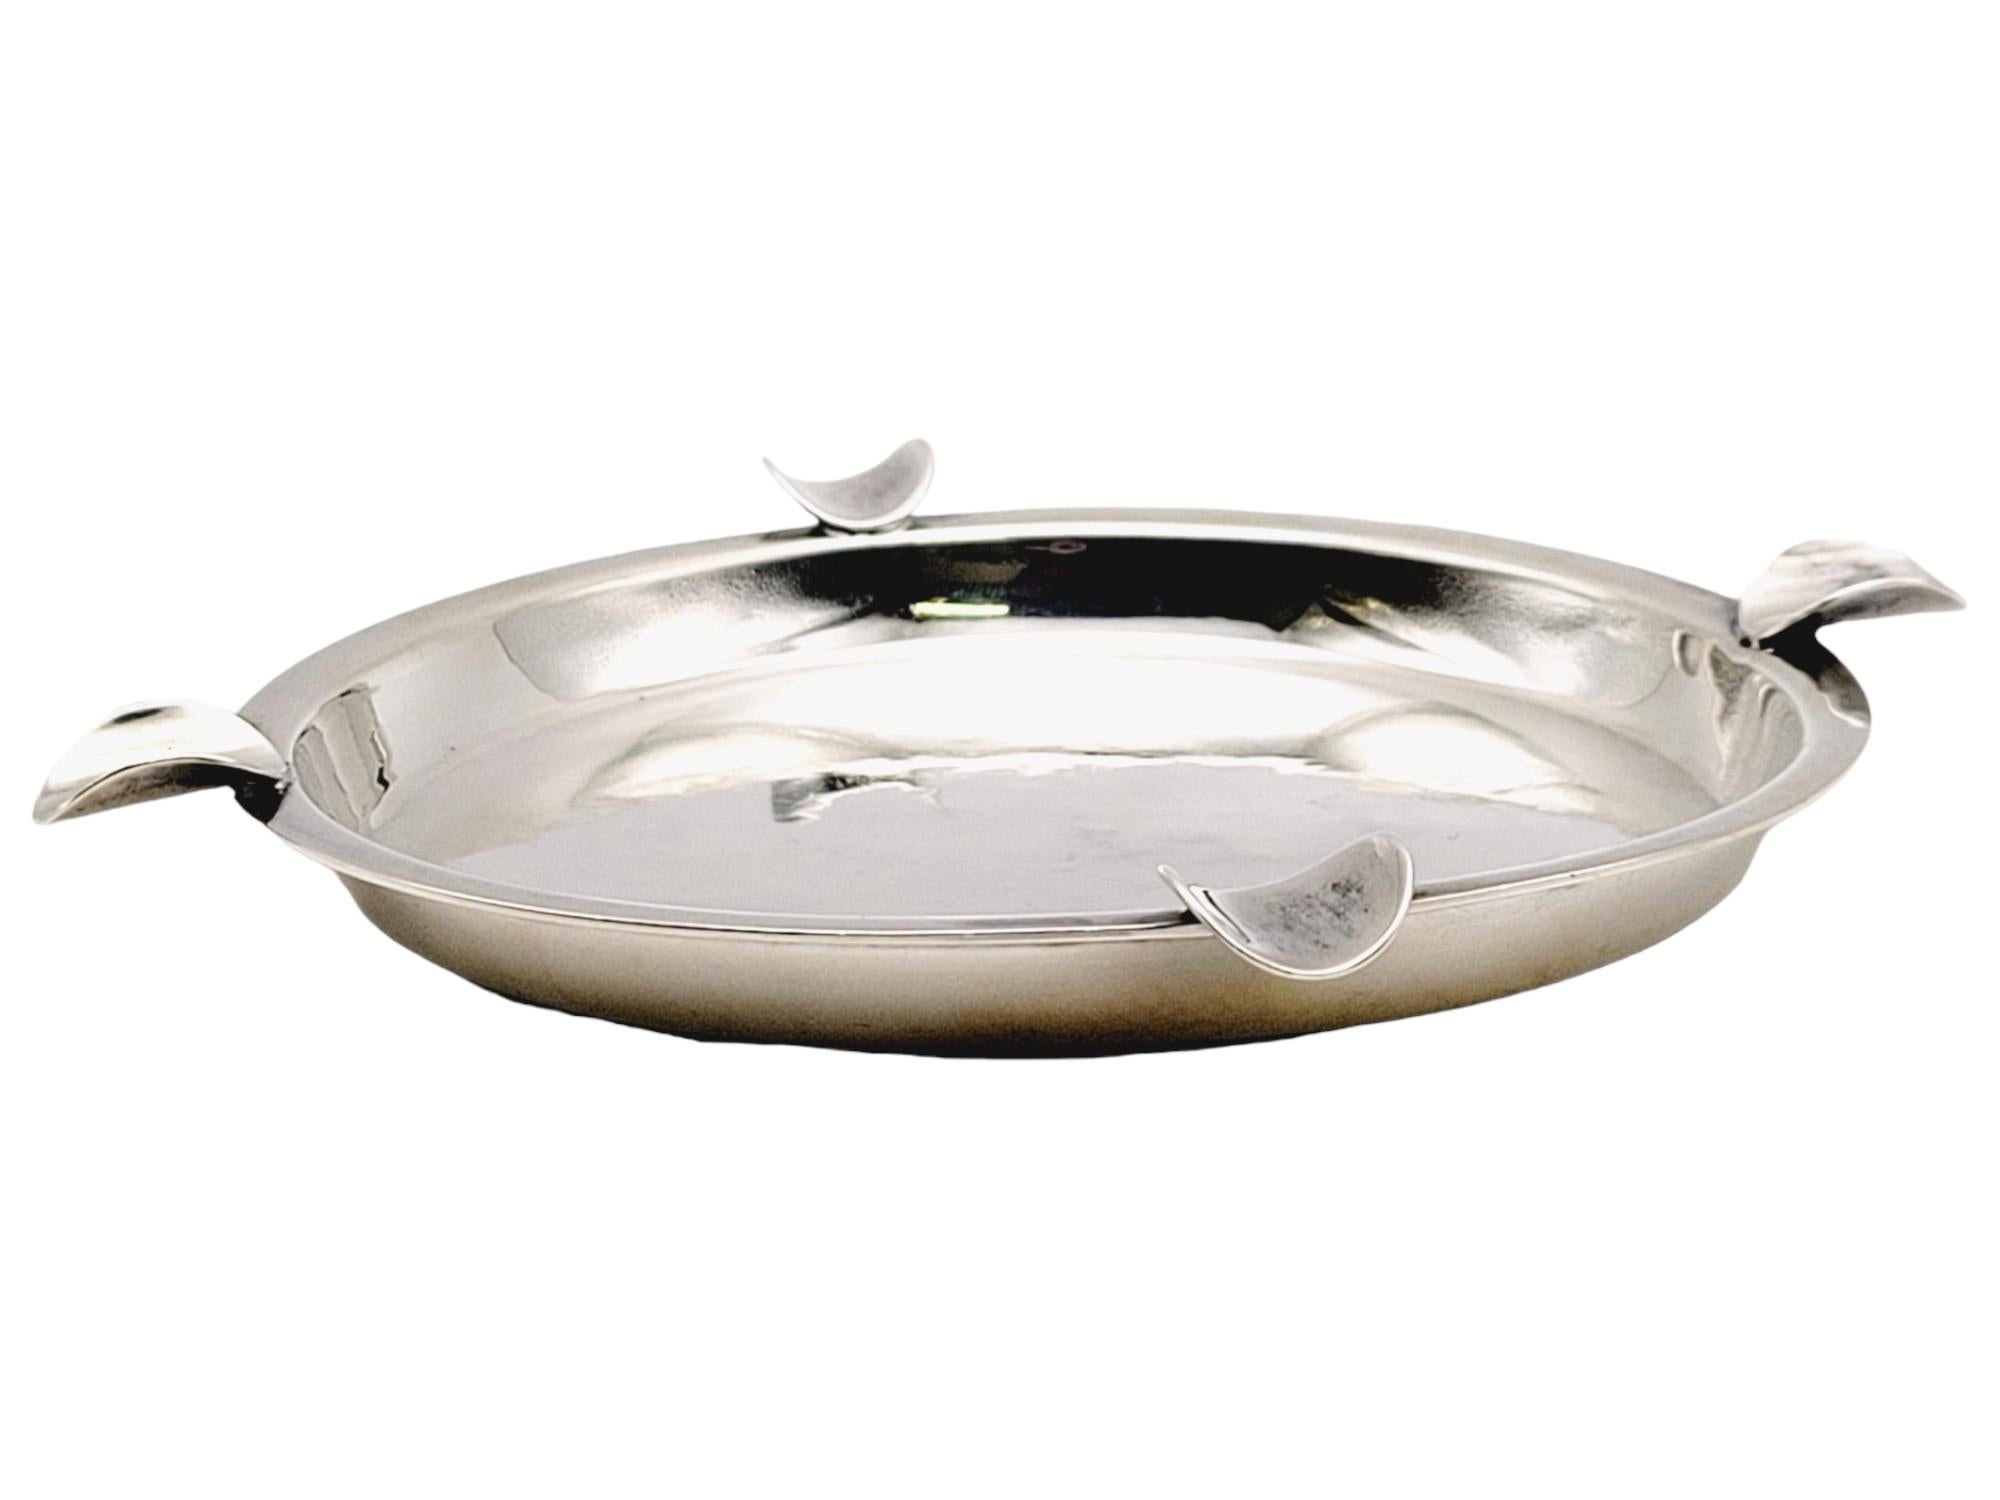 Carl Poul Petersen Polished Modern Ashtray in Sterling Silver, circa 1940-1970 For Sale 2